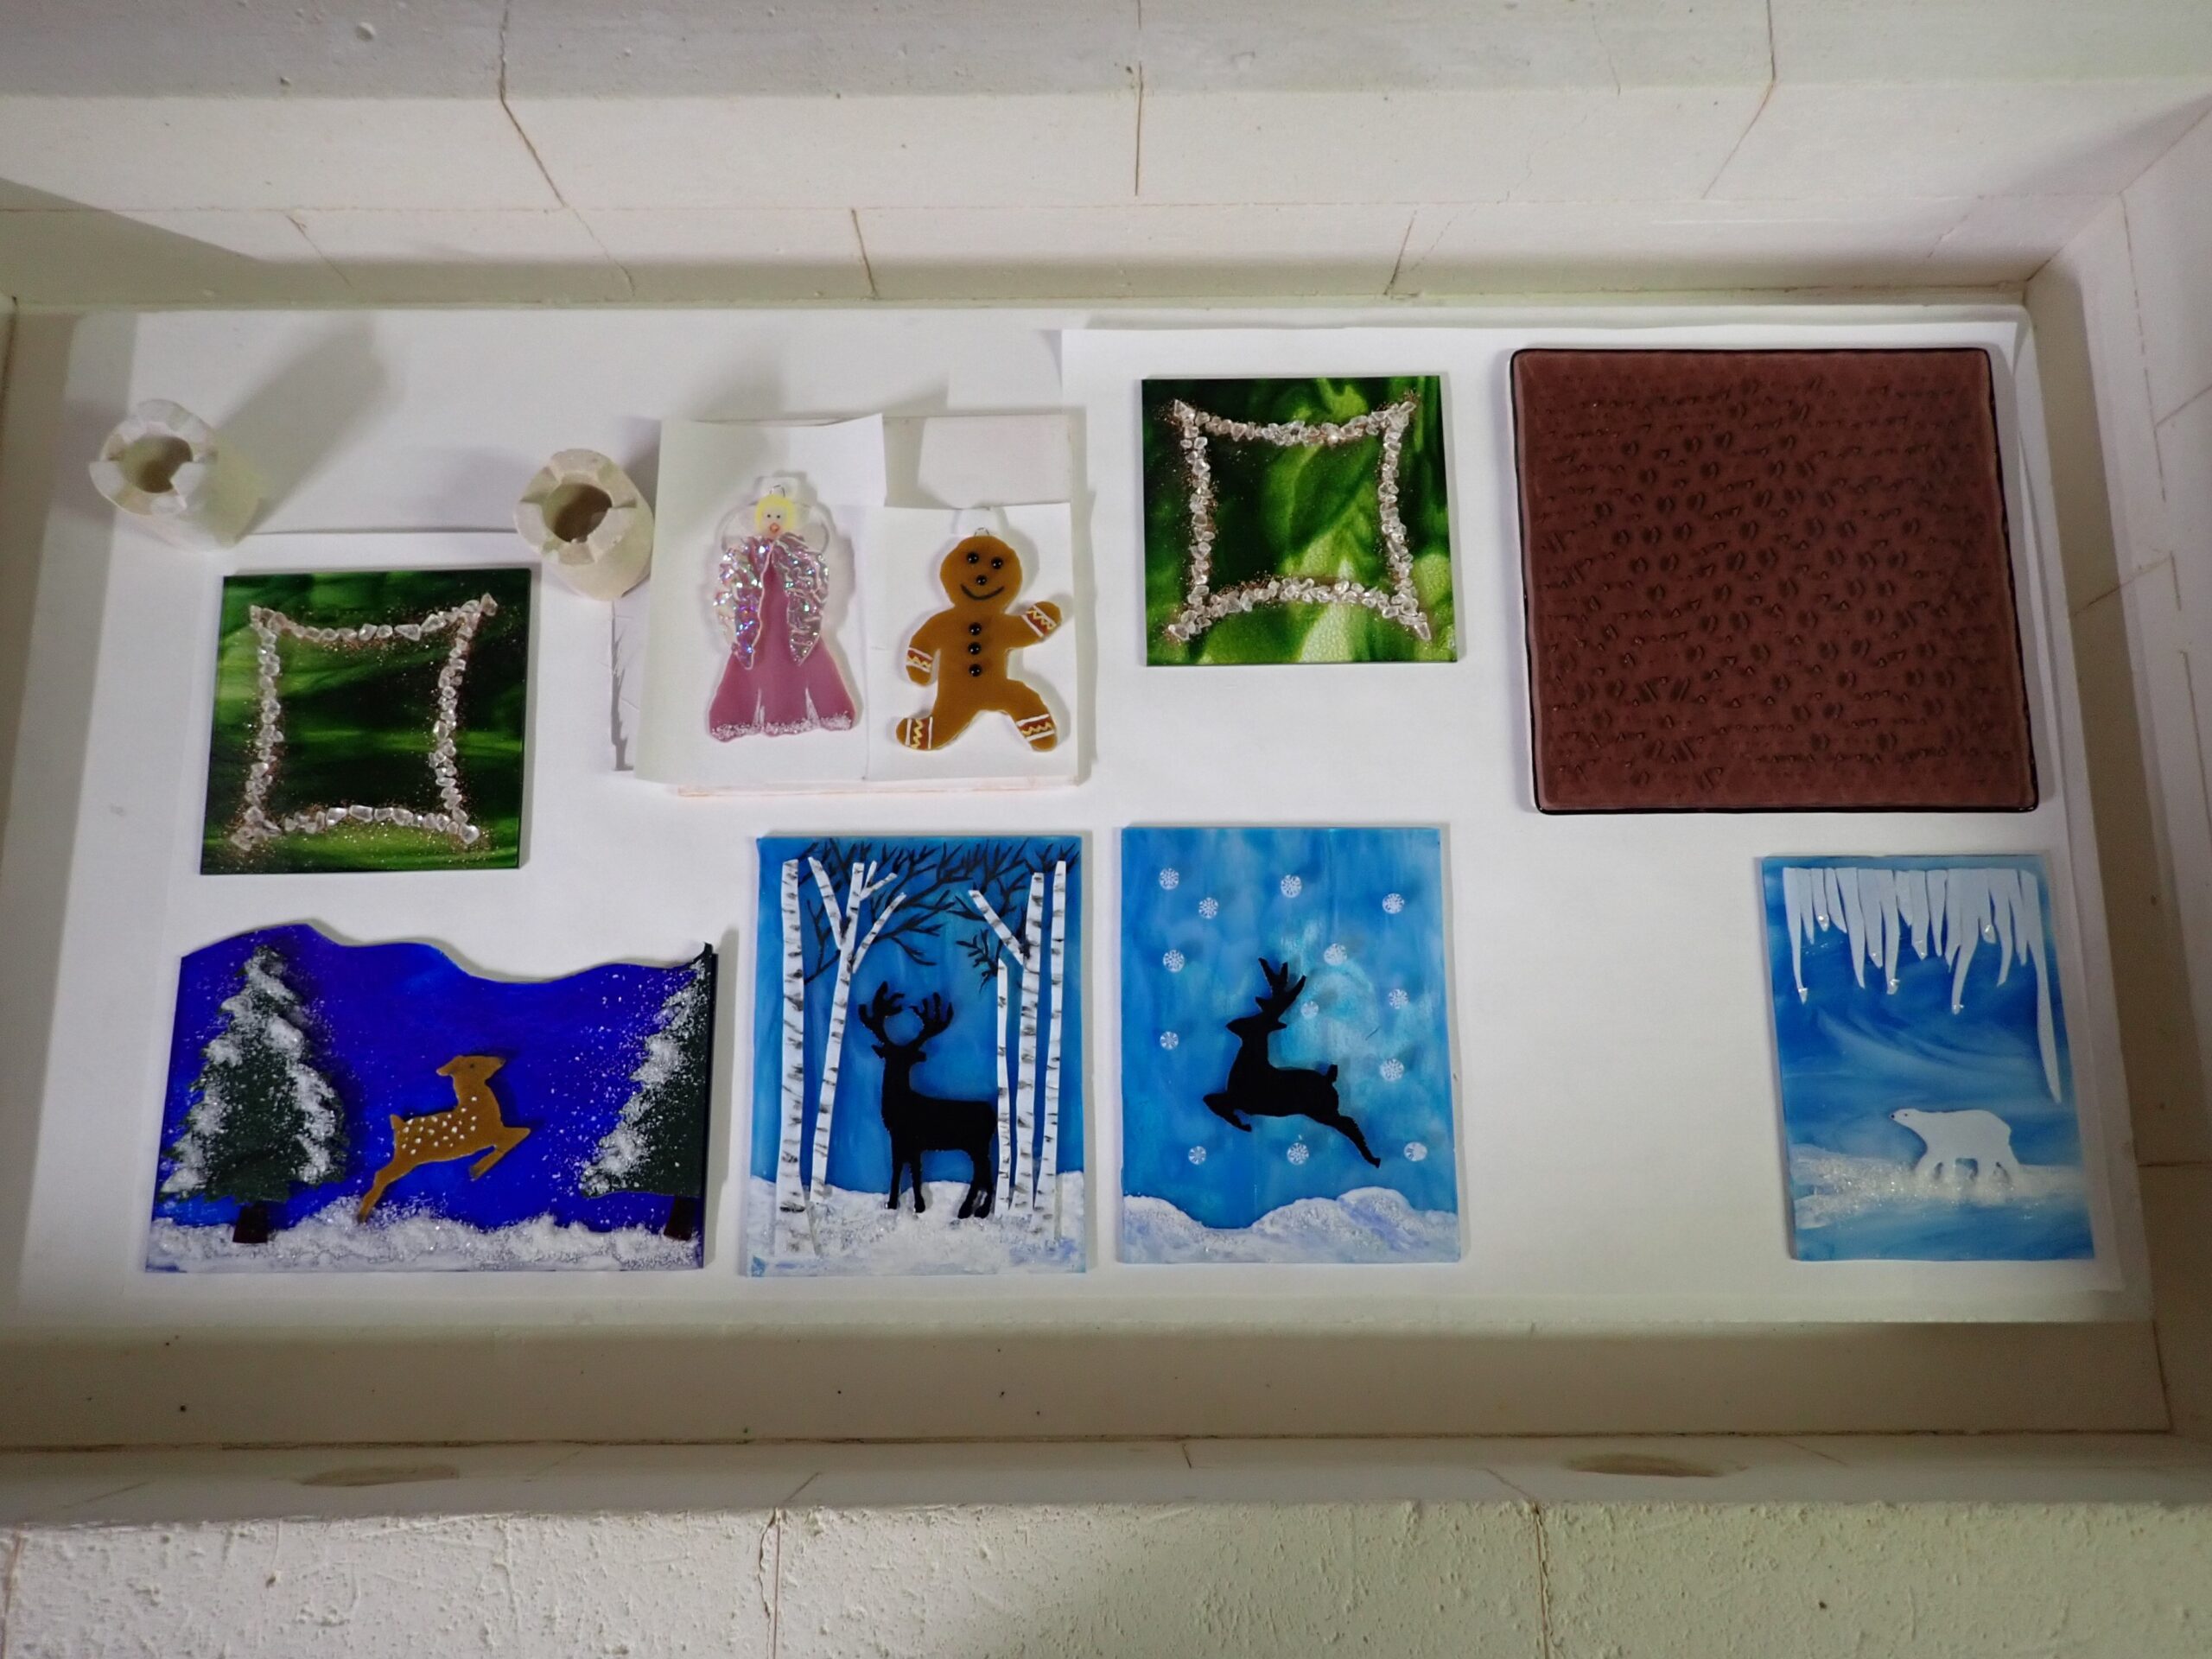 Fused glass for Christmas in the kiln